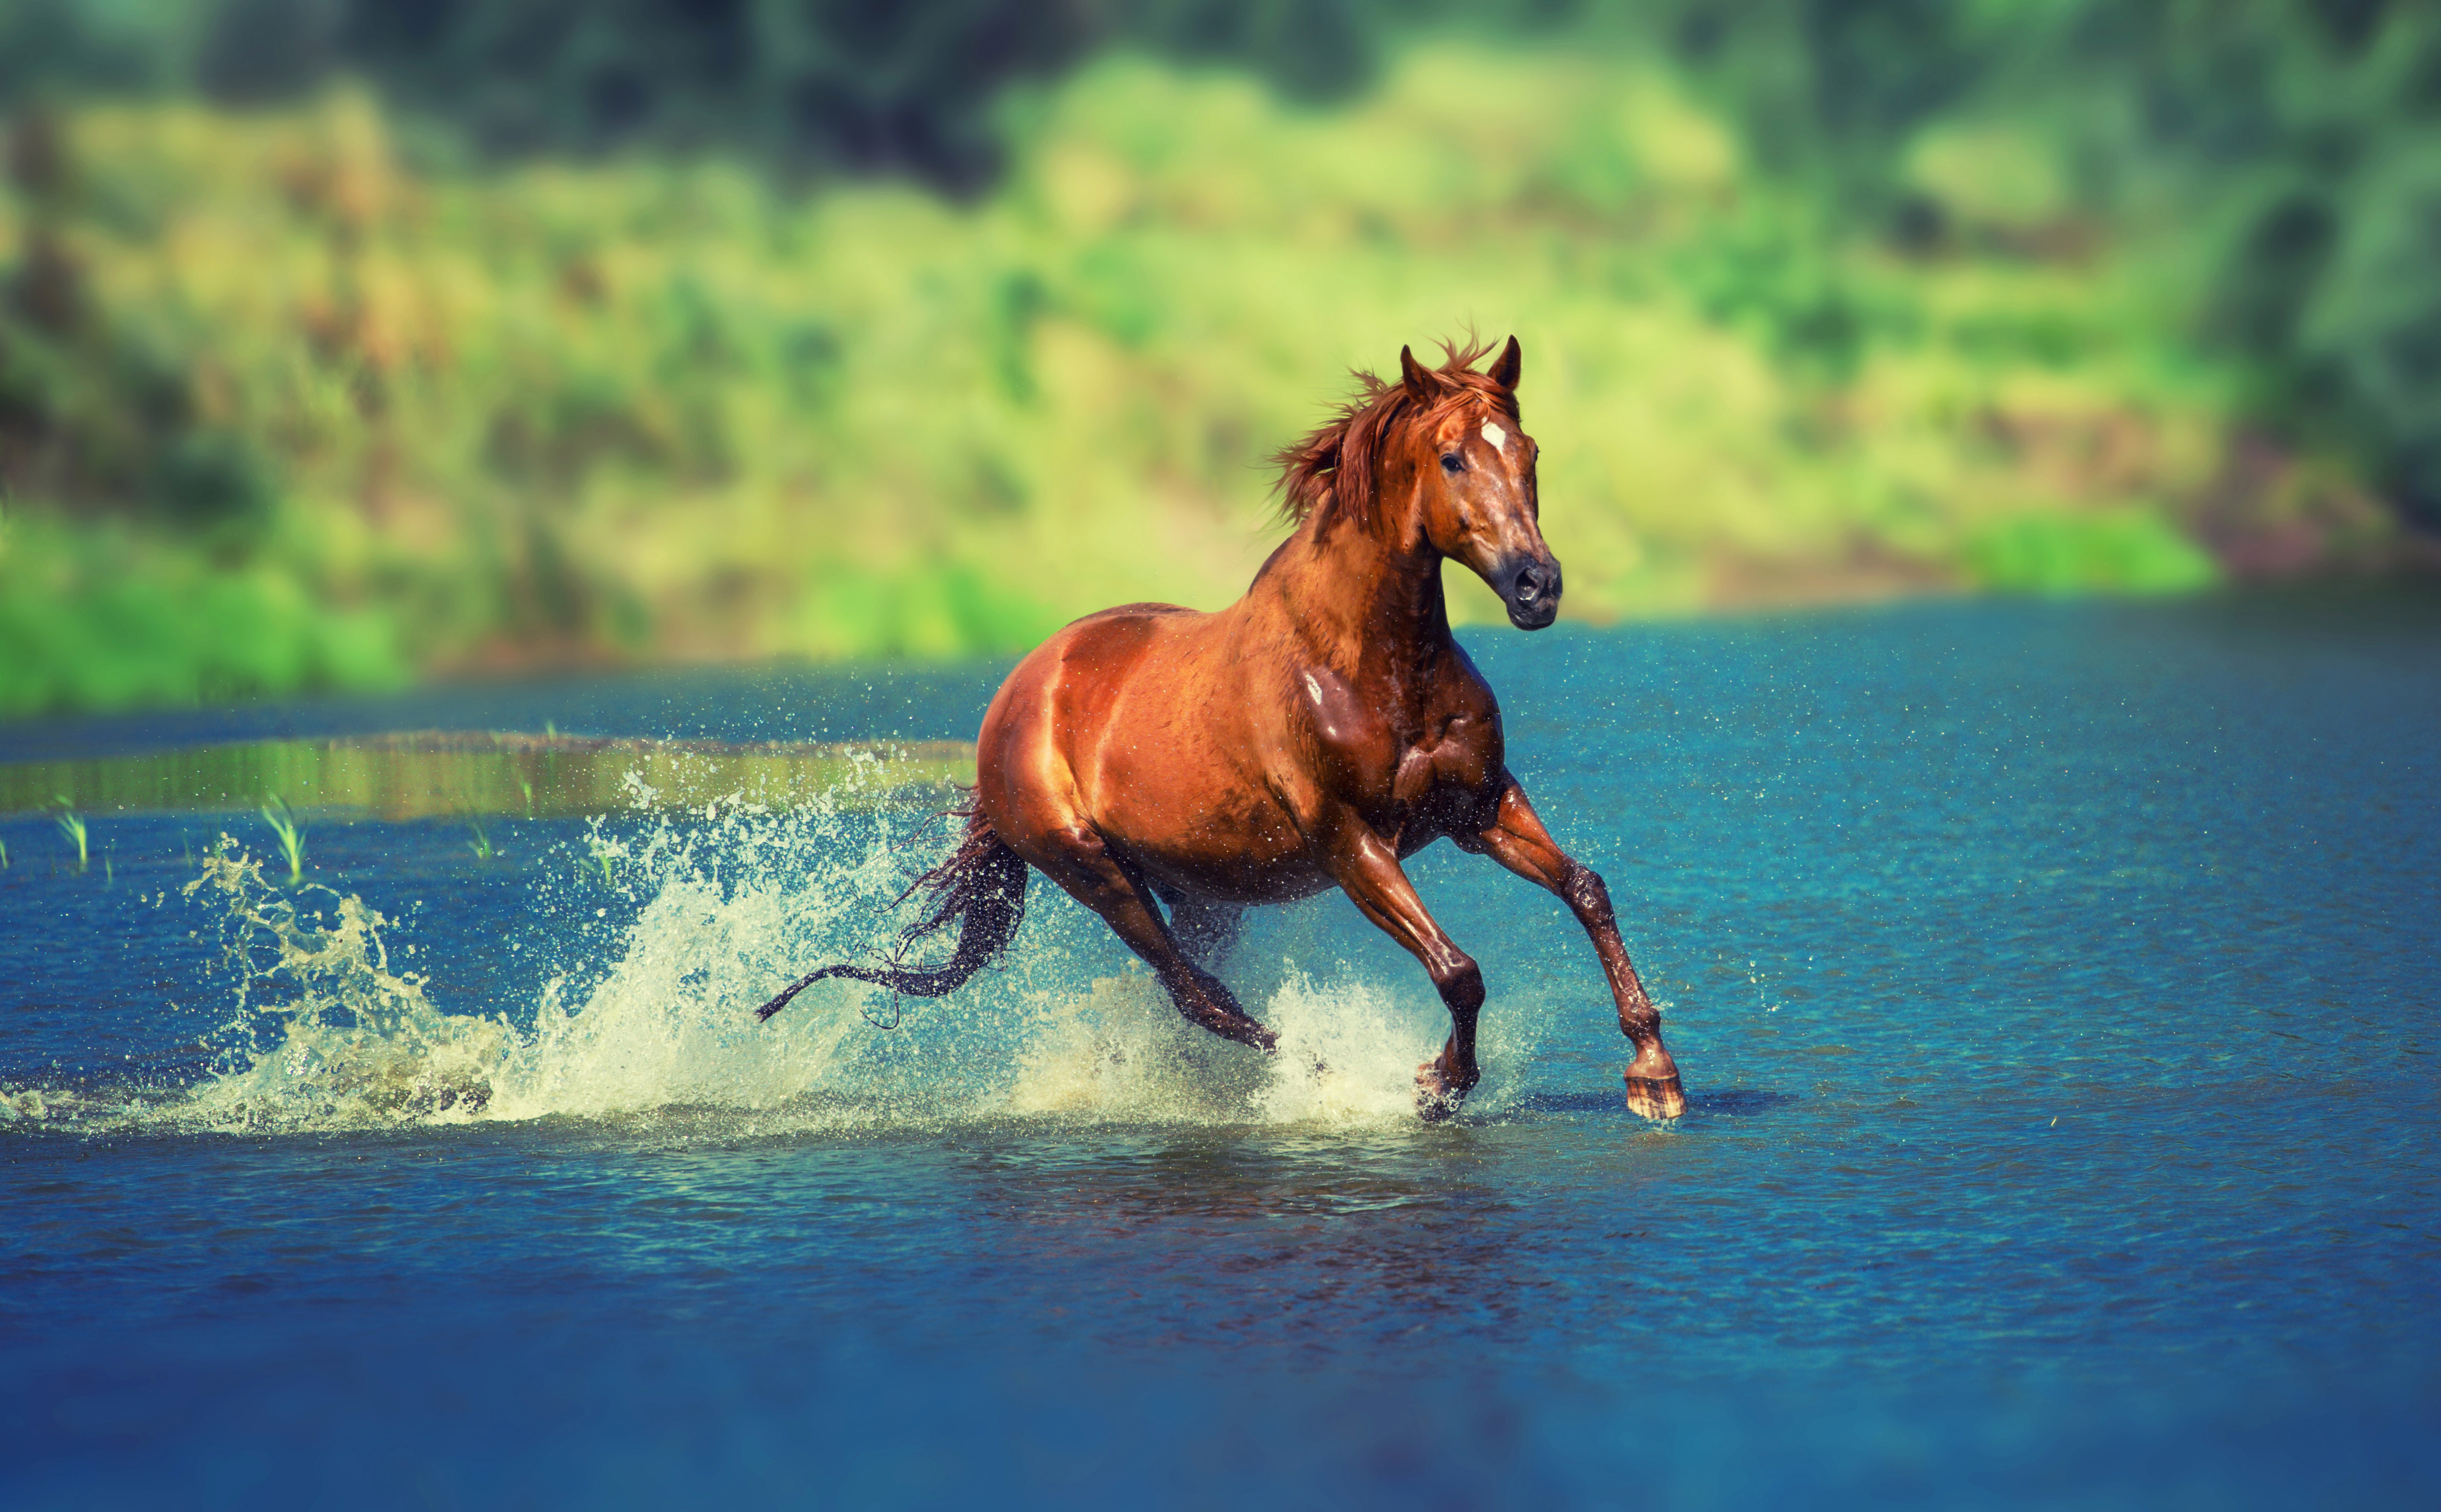 Running Horse In Water, HD Animals, 4k Wallpapers, Images, Backgrounds